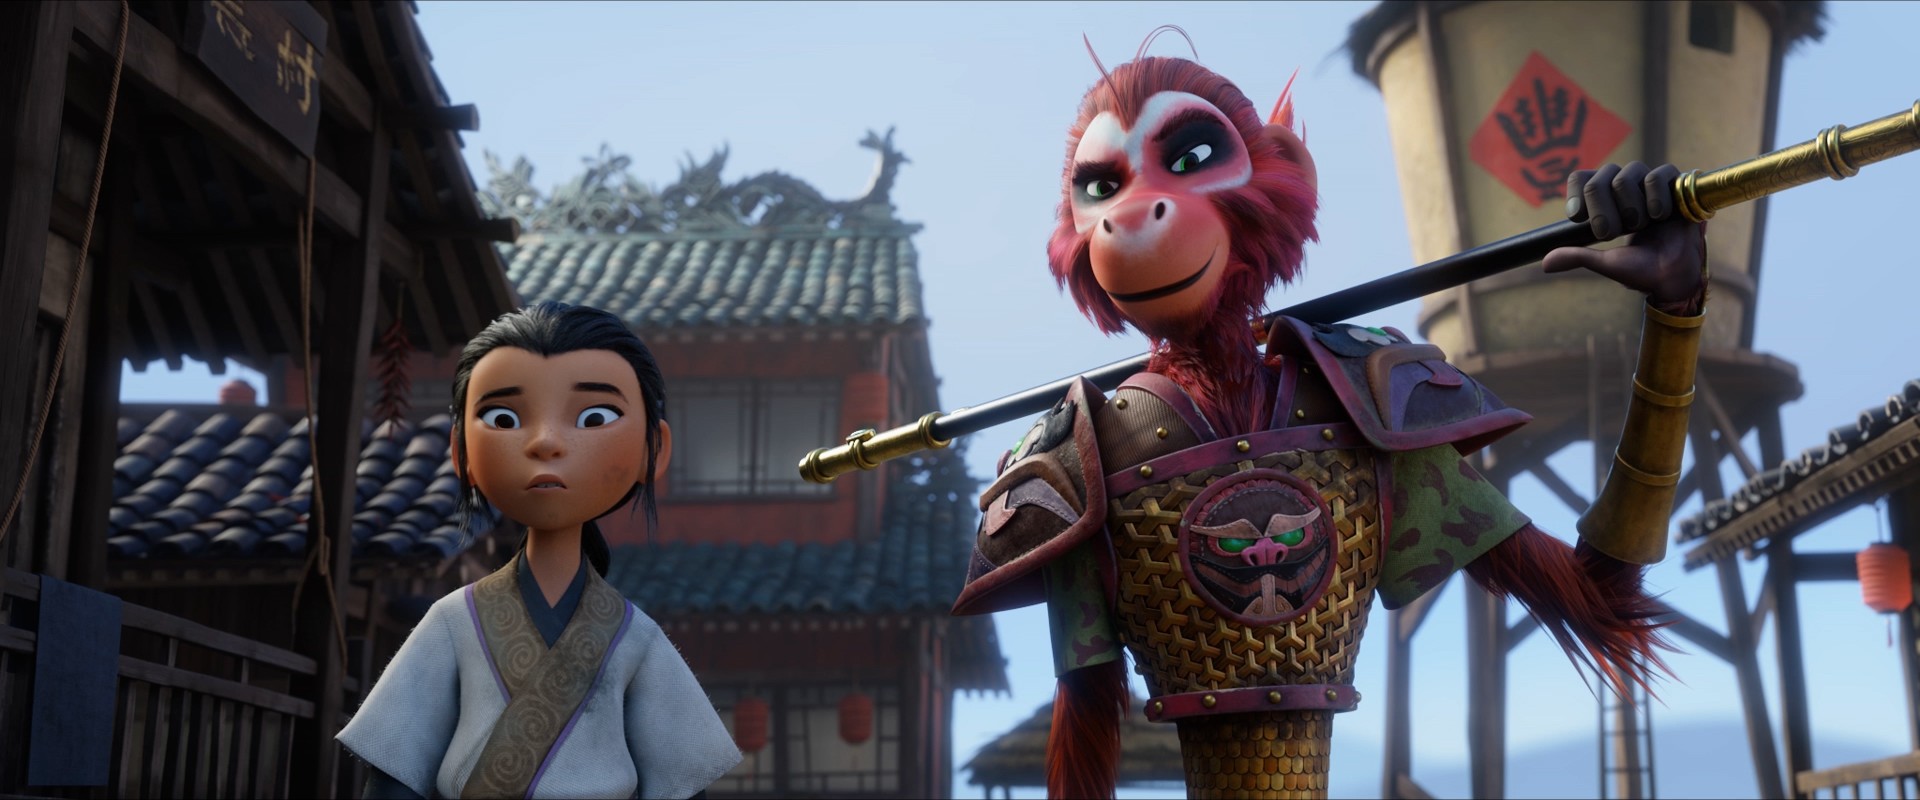 The Monkey King - Rotten Tomatoes